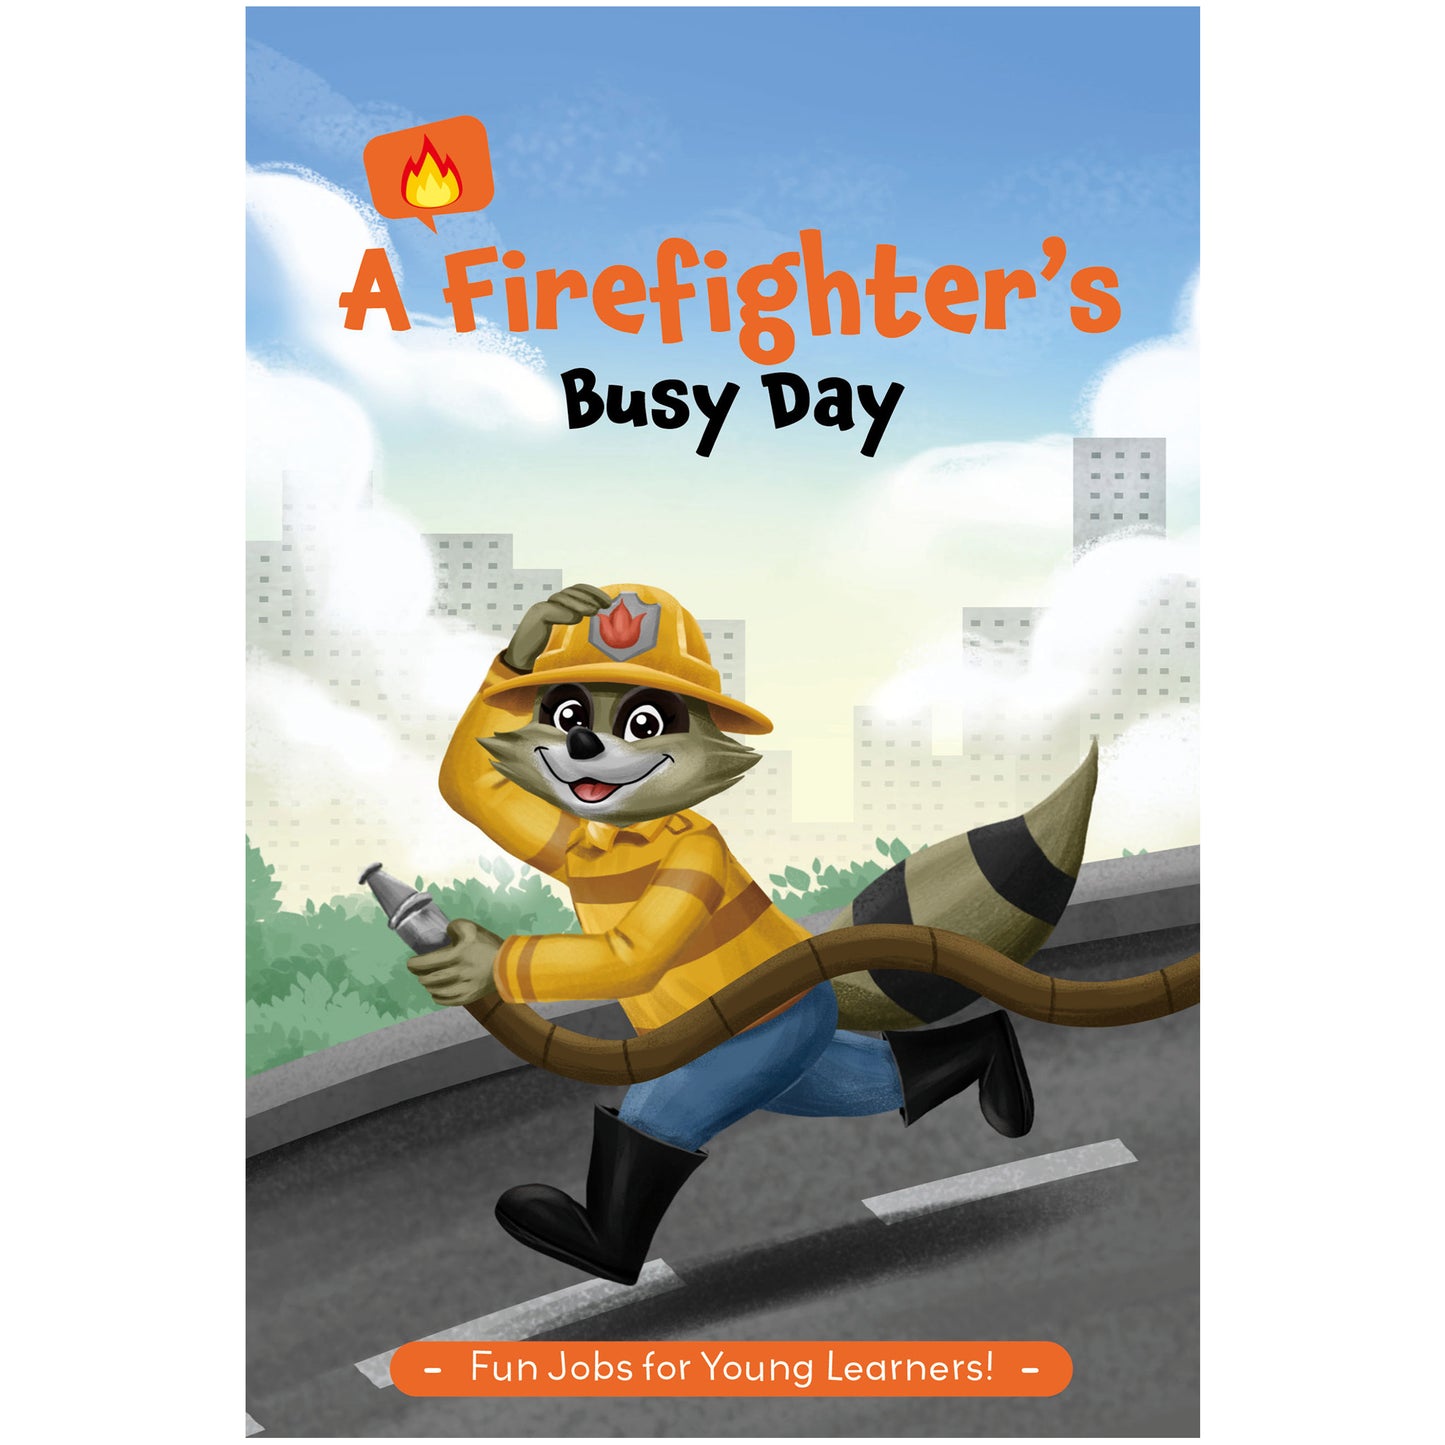 A Firefighter's Busy Day